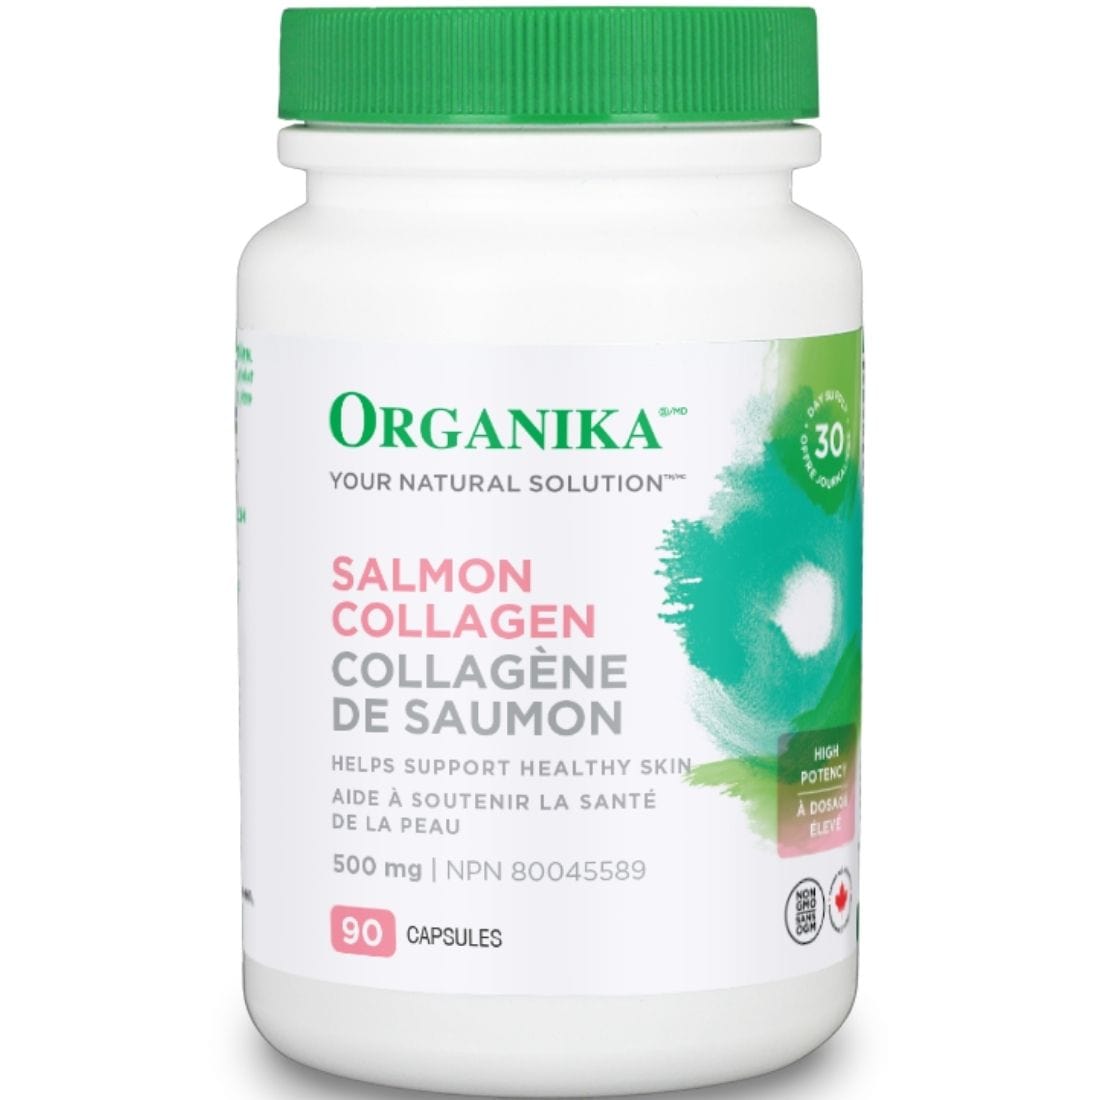 Organika Salmon Collagen 500mg, High Potency, Supports Healthy Skin, 90 Capsules